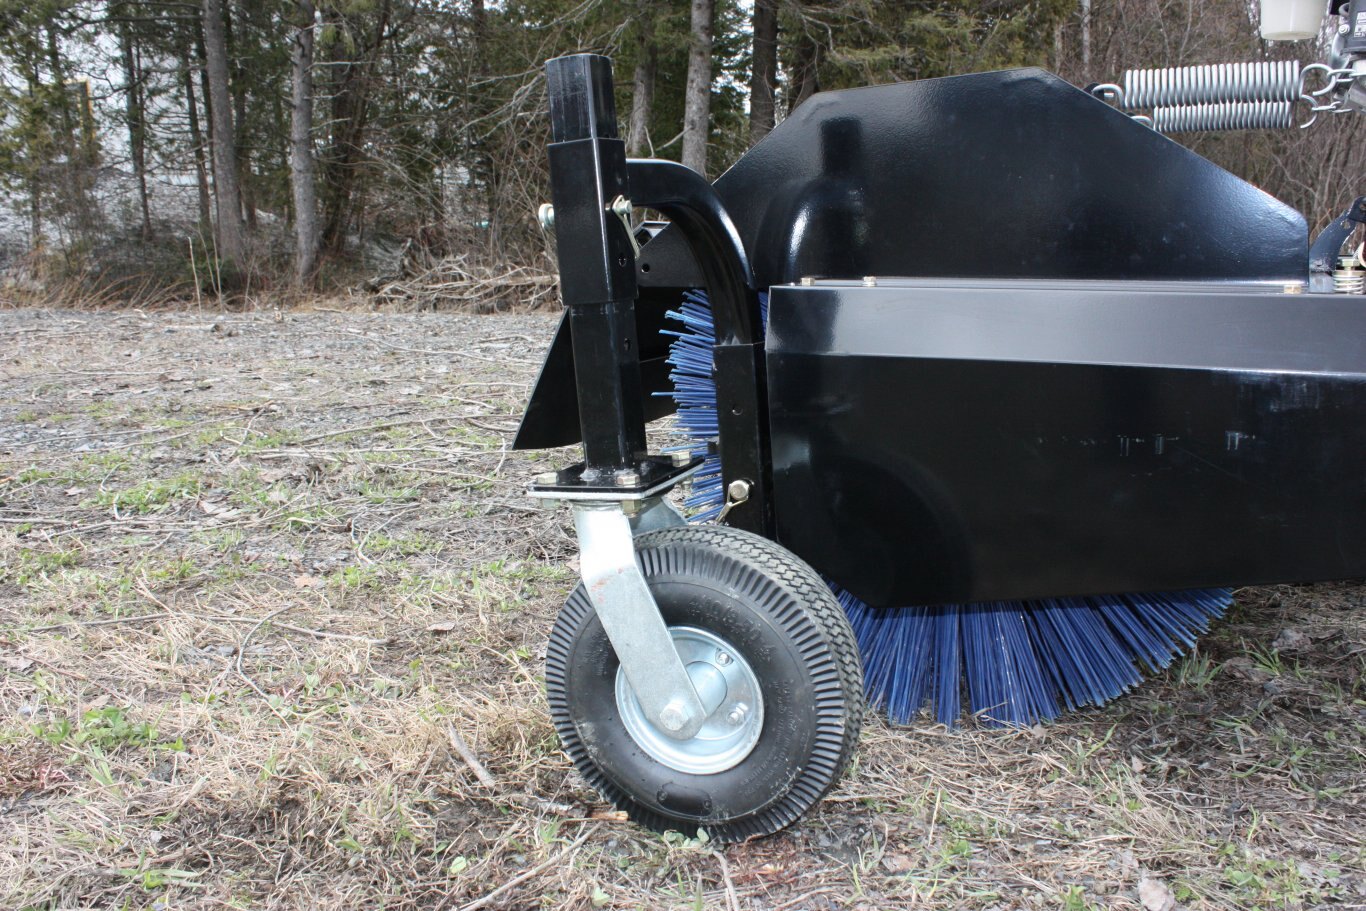 Bercomac 66 Rotary Brooms for tractors equipped with Skid Steer style attach